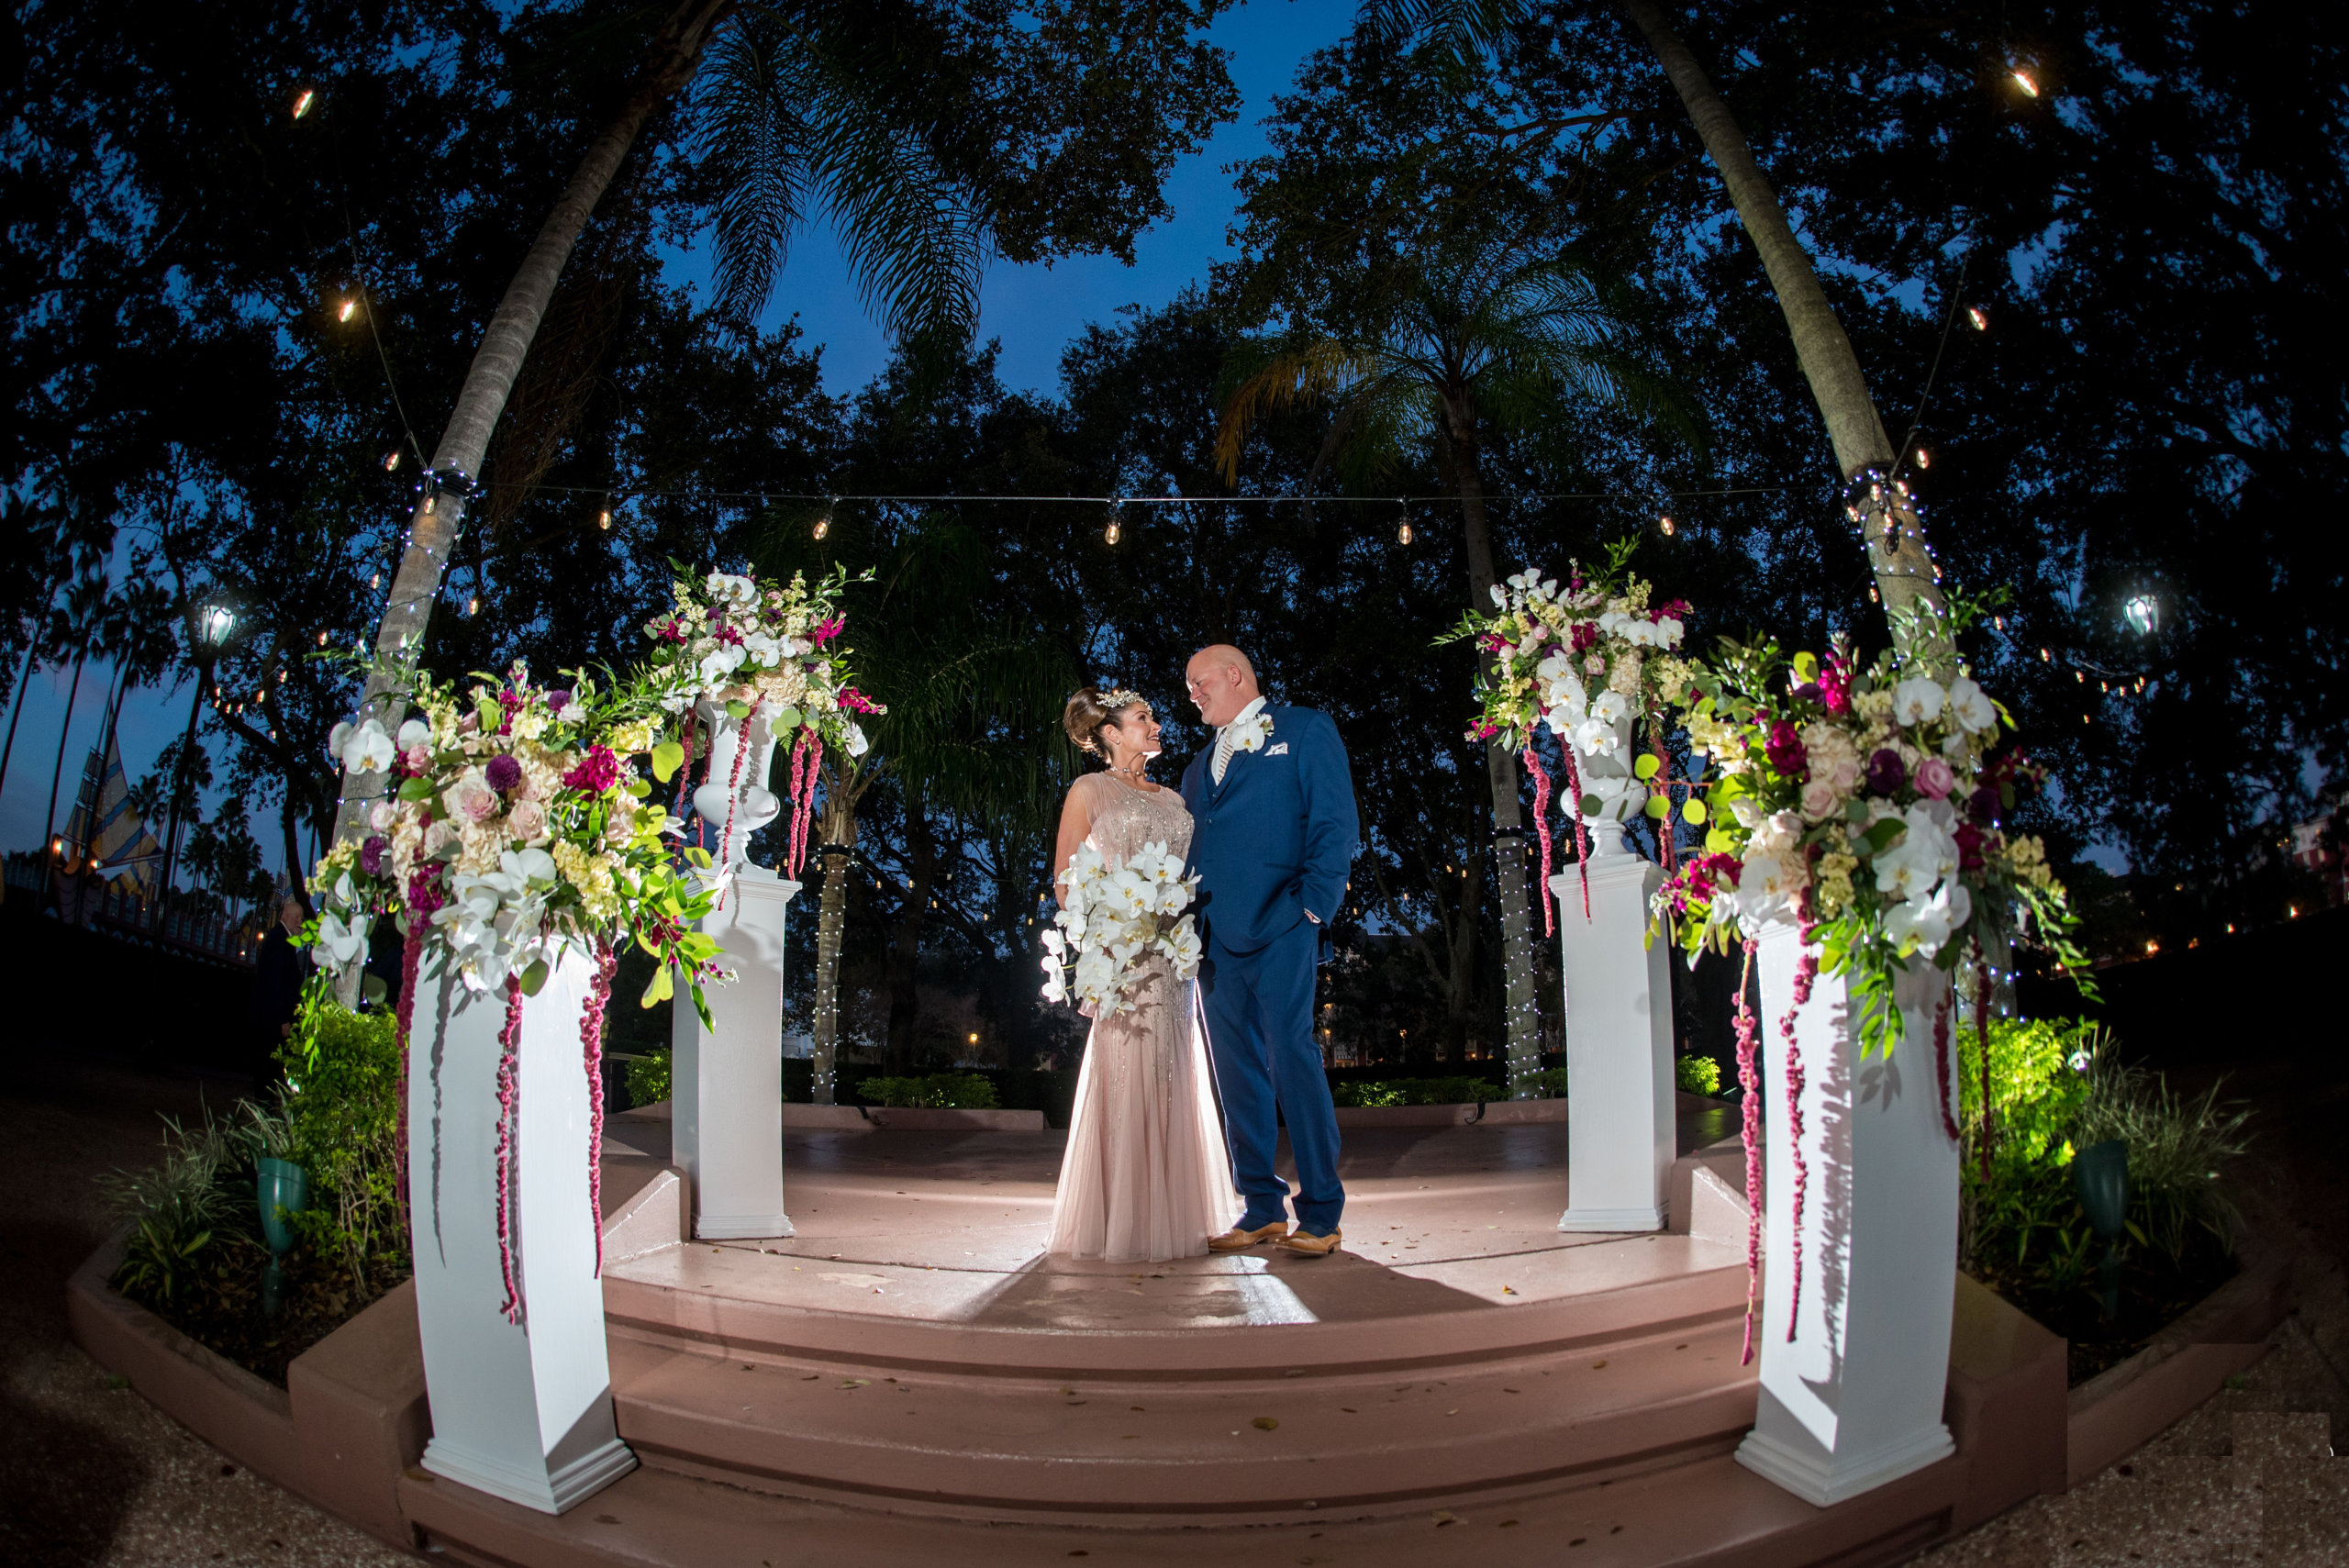 Wedding Couple After Ceremony at Crescent Terrace at the Walt Disney World Swan Resort